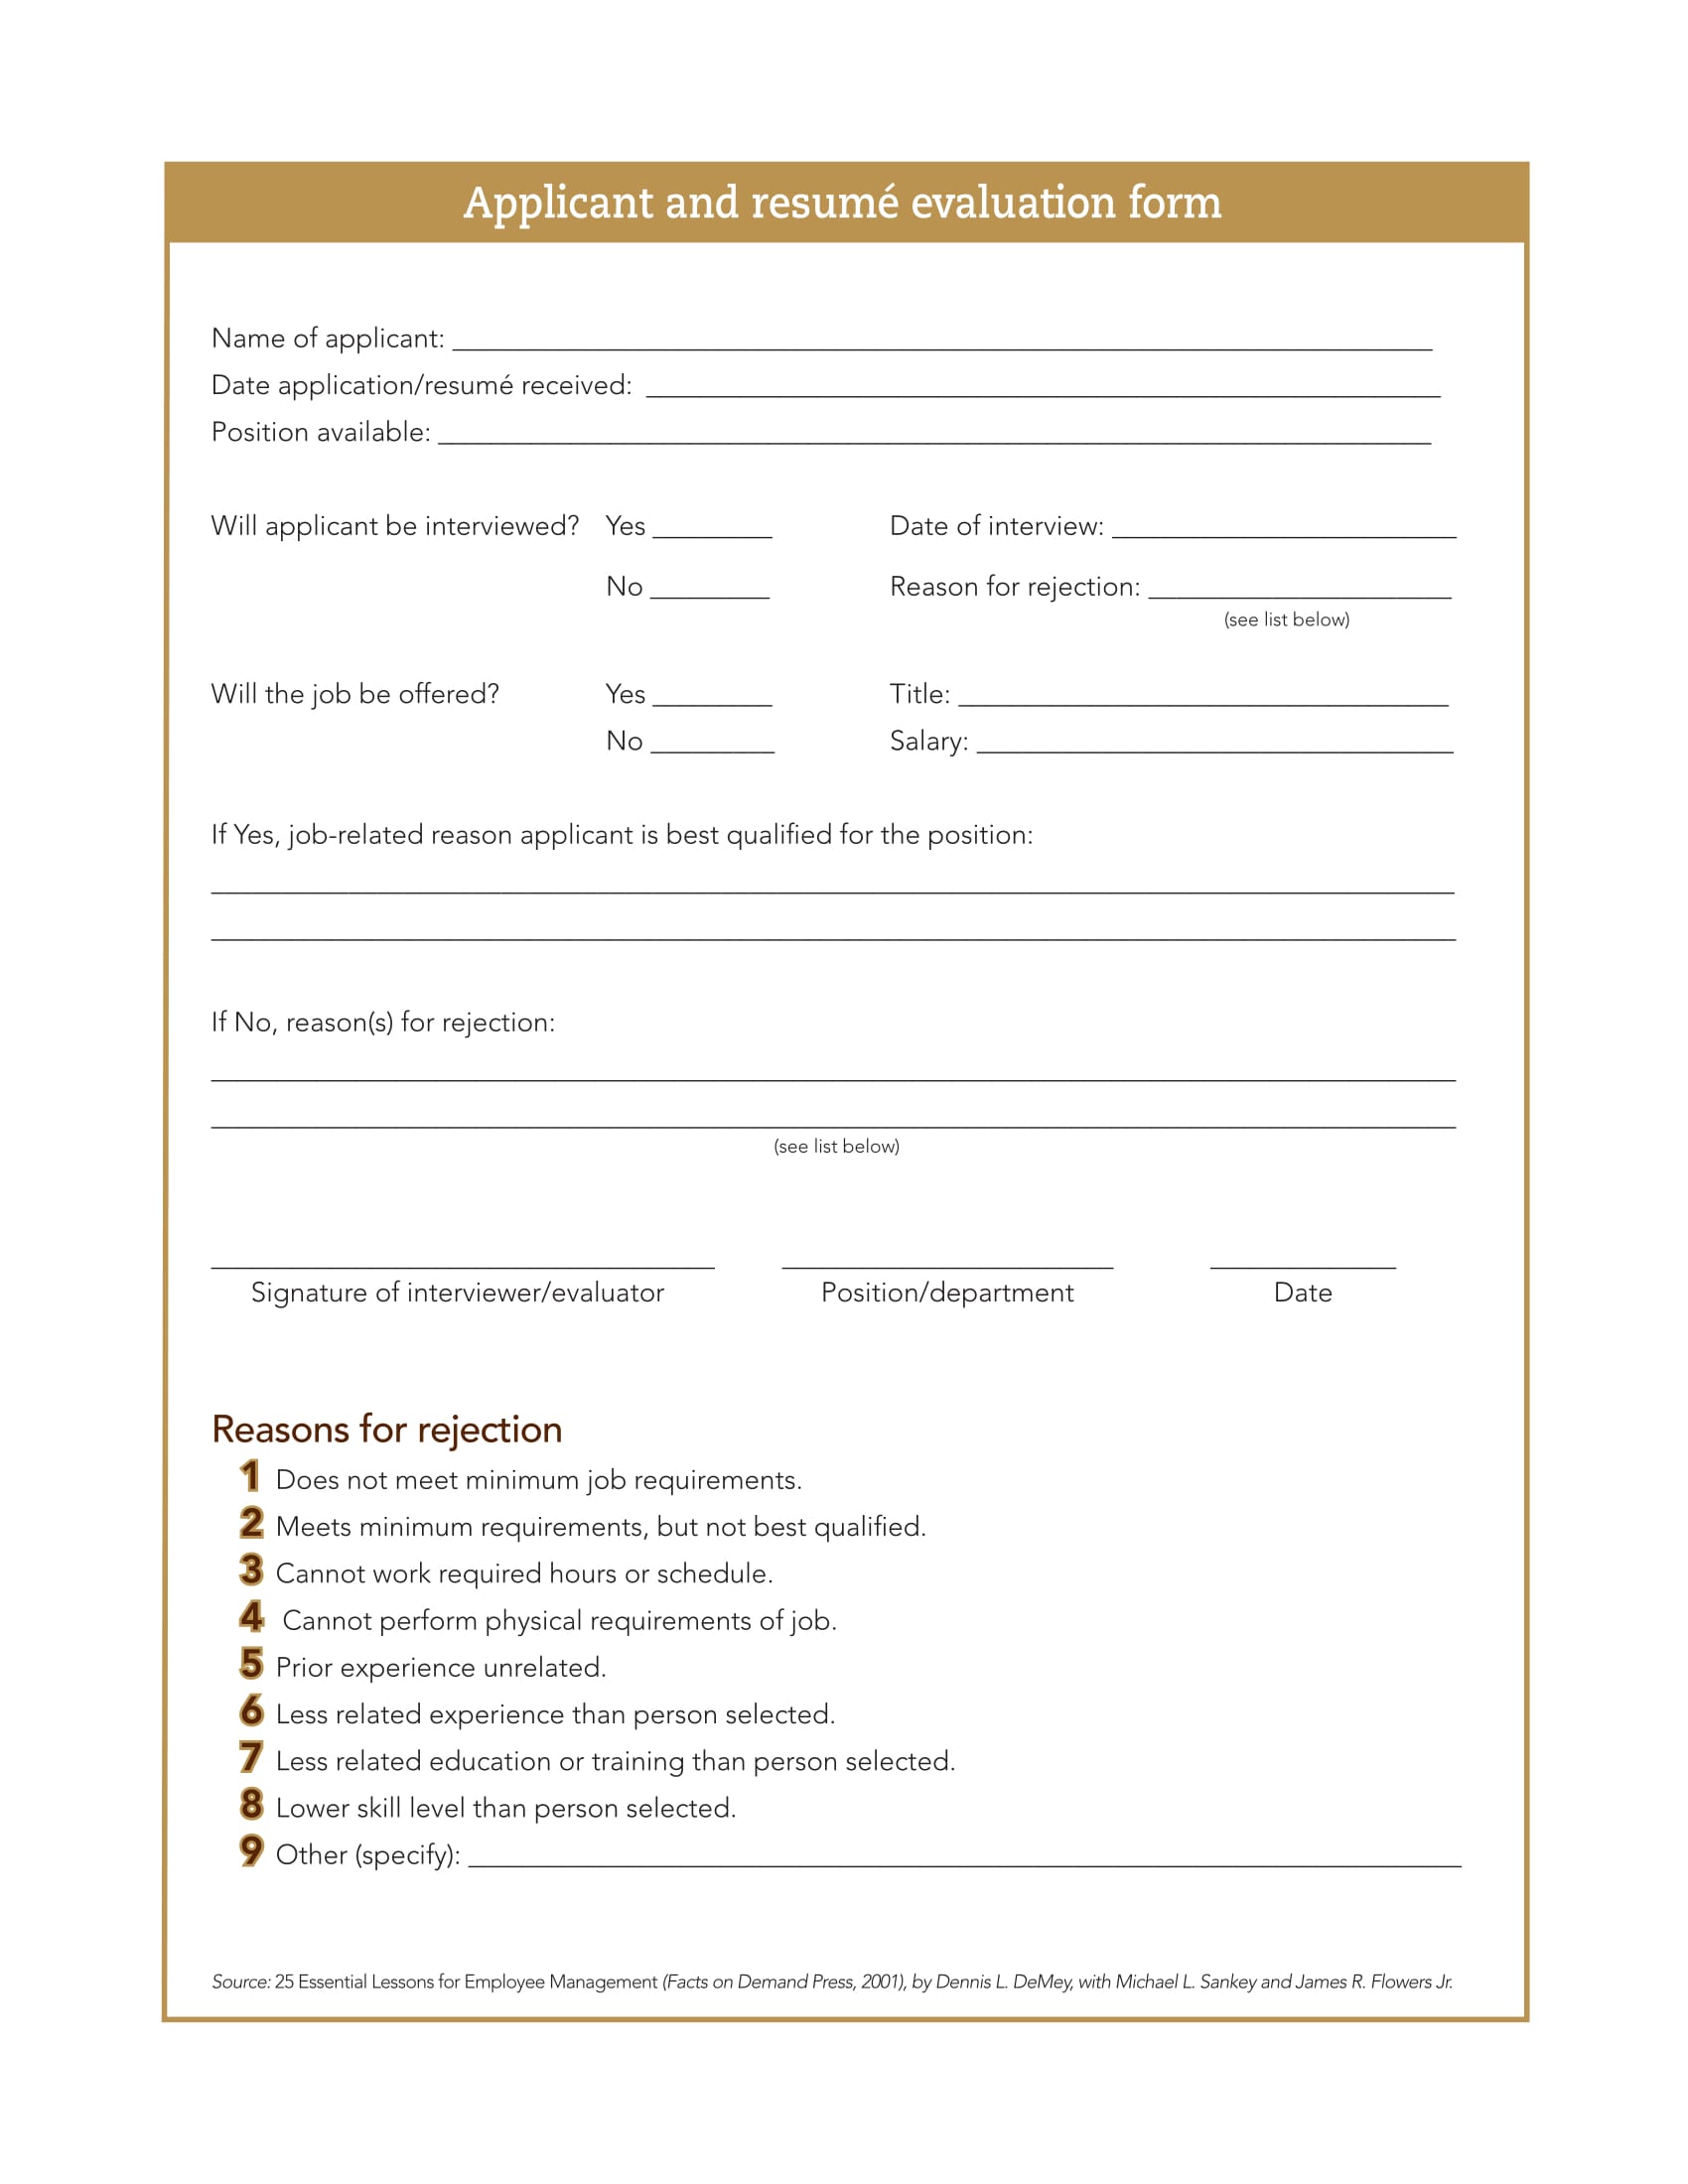 applicant and resume evaluation form 1